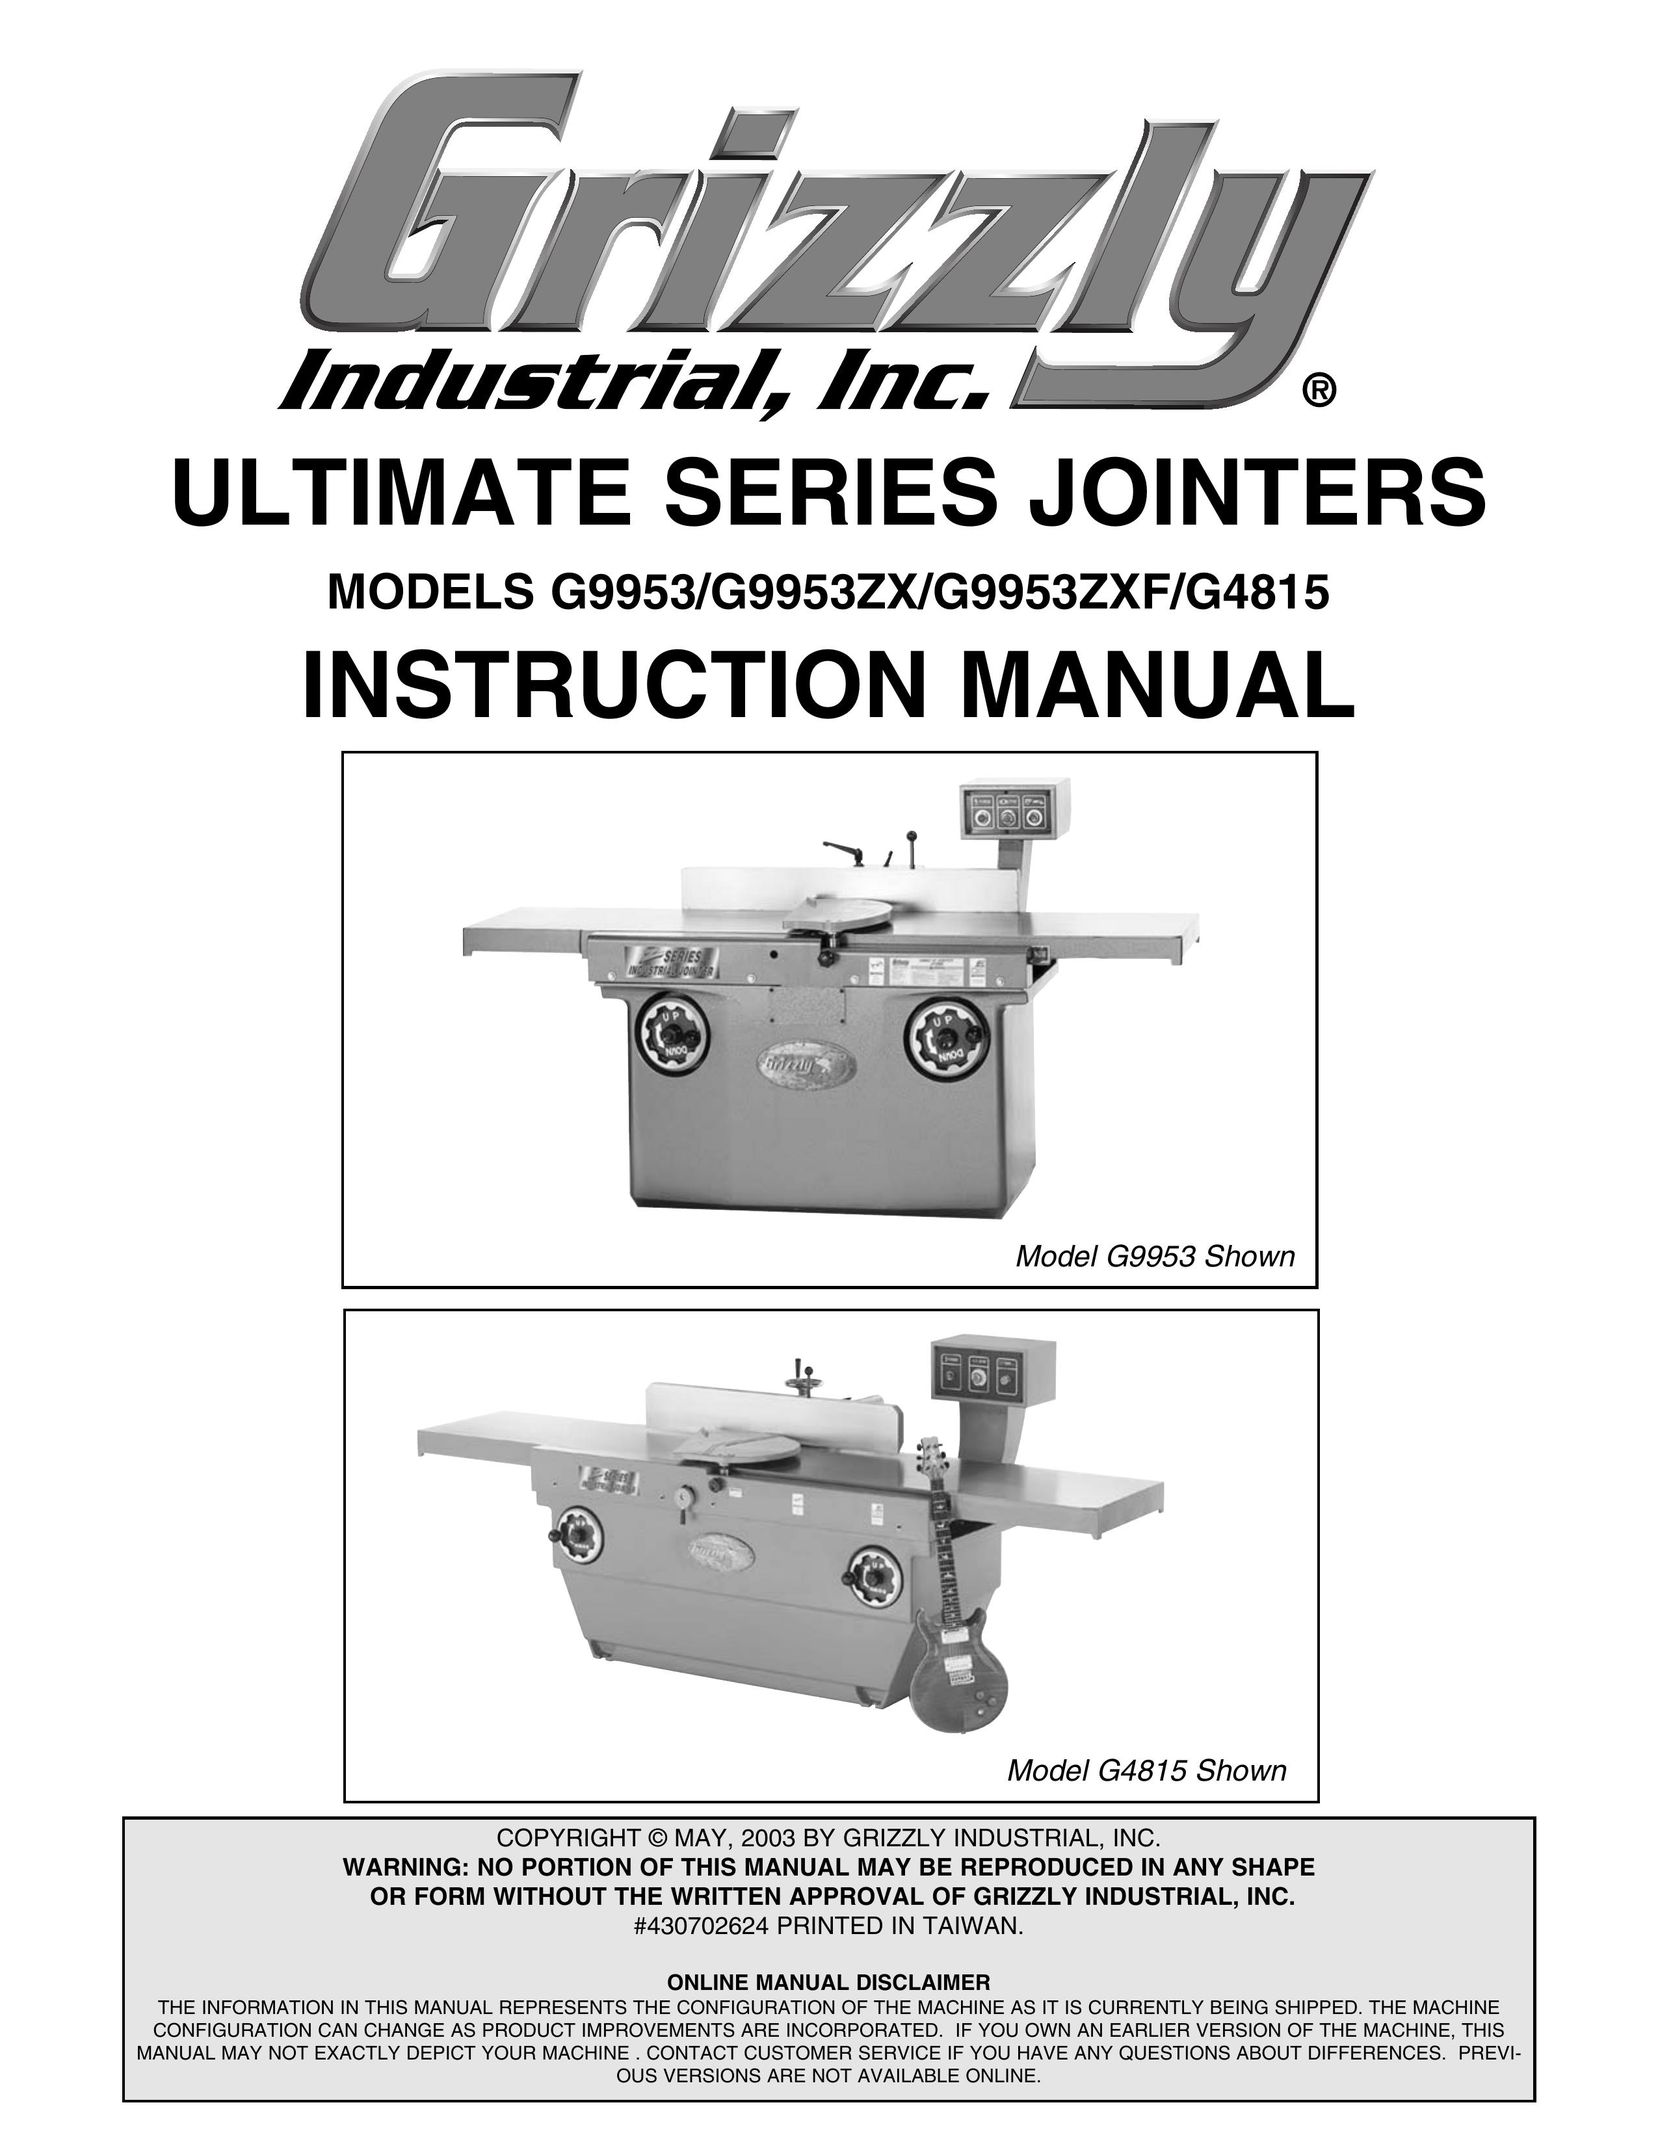 Grizzly G4815 Biscuit Joiner User Manual